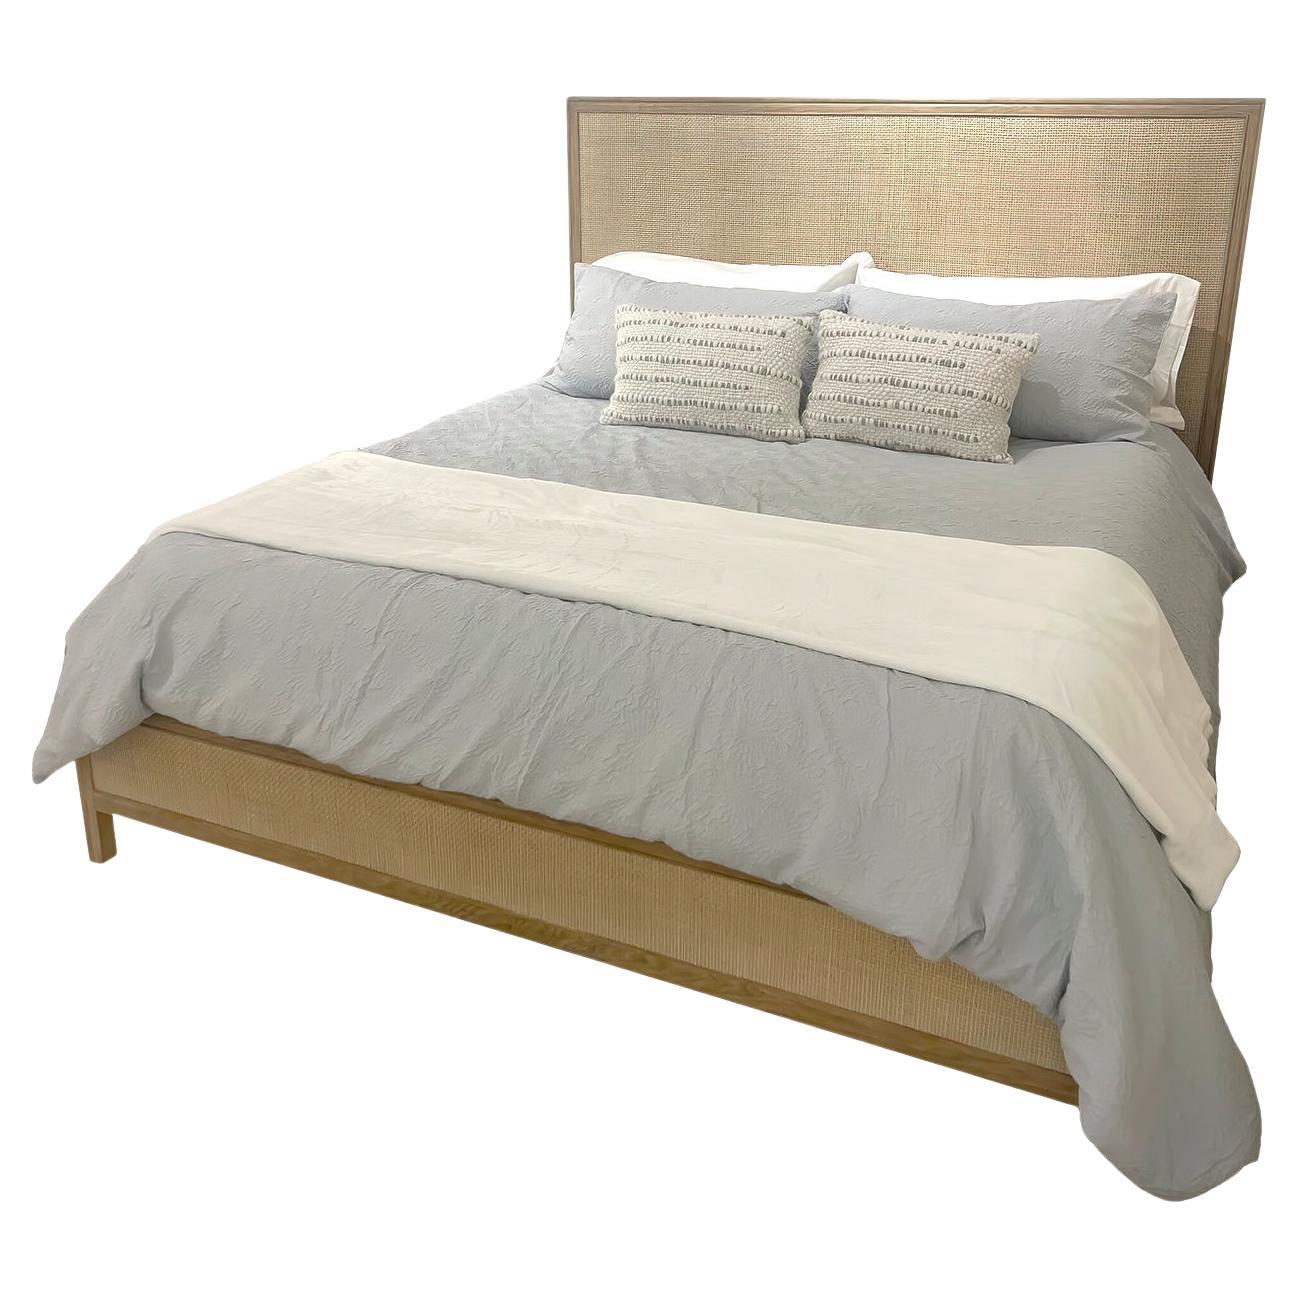 Daylight Modern Bed For Sale